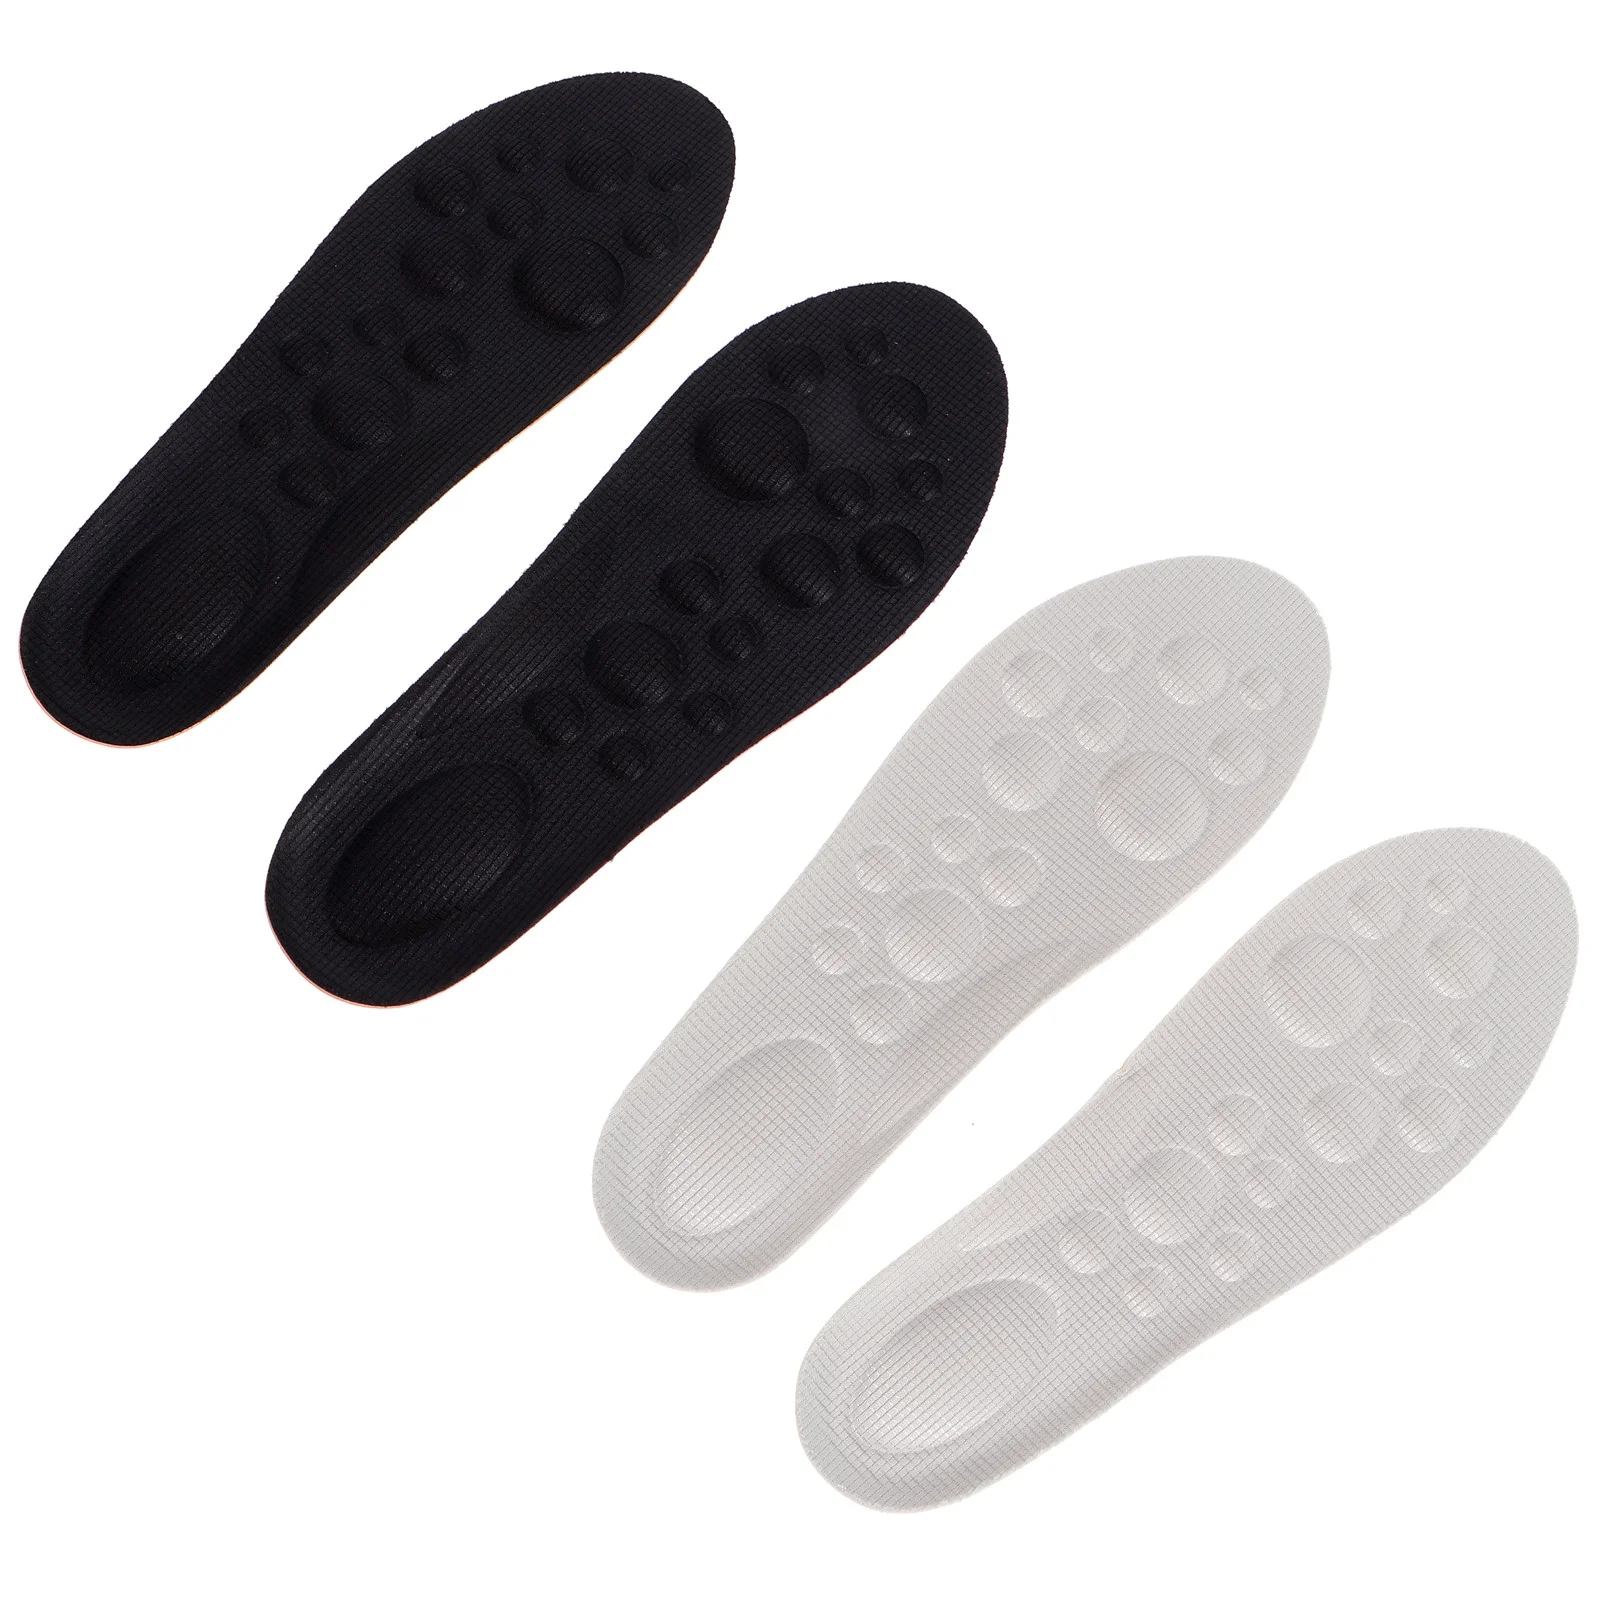 

2 Pairs Insole Massage Insoles Kids Child Feet Cushion Pads Foot Running Shoes Arch Support Damping